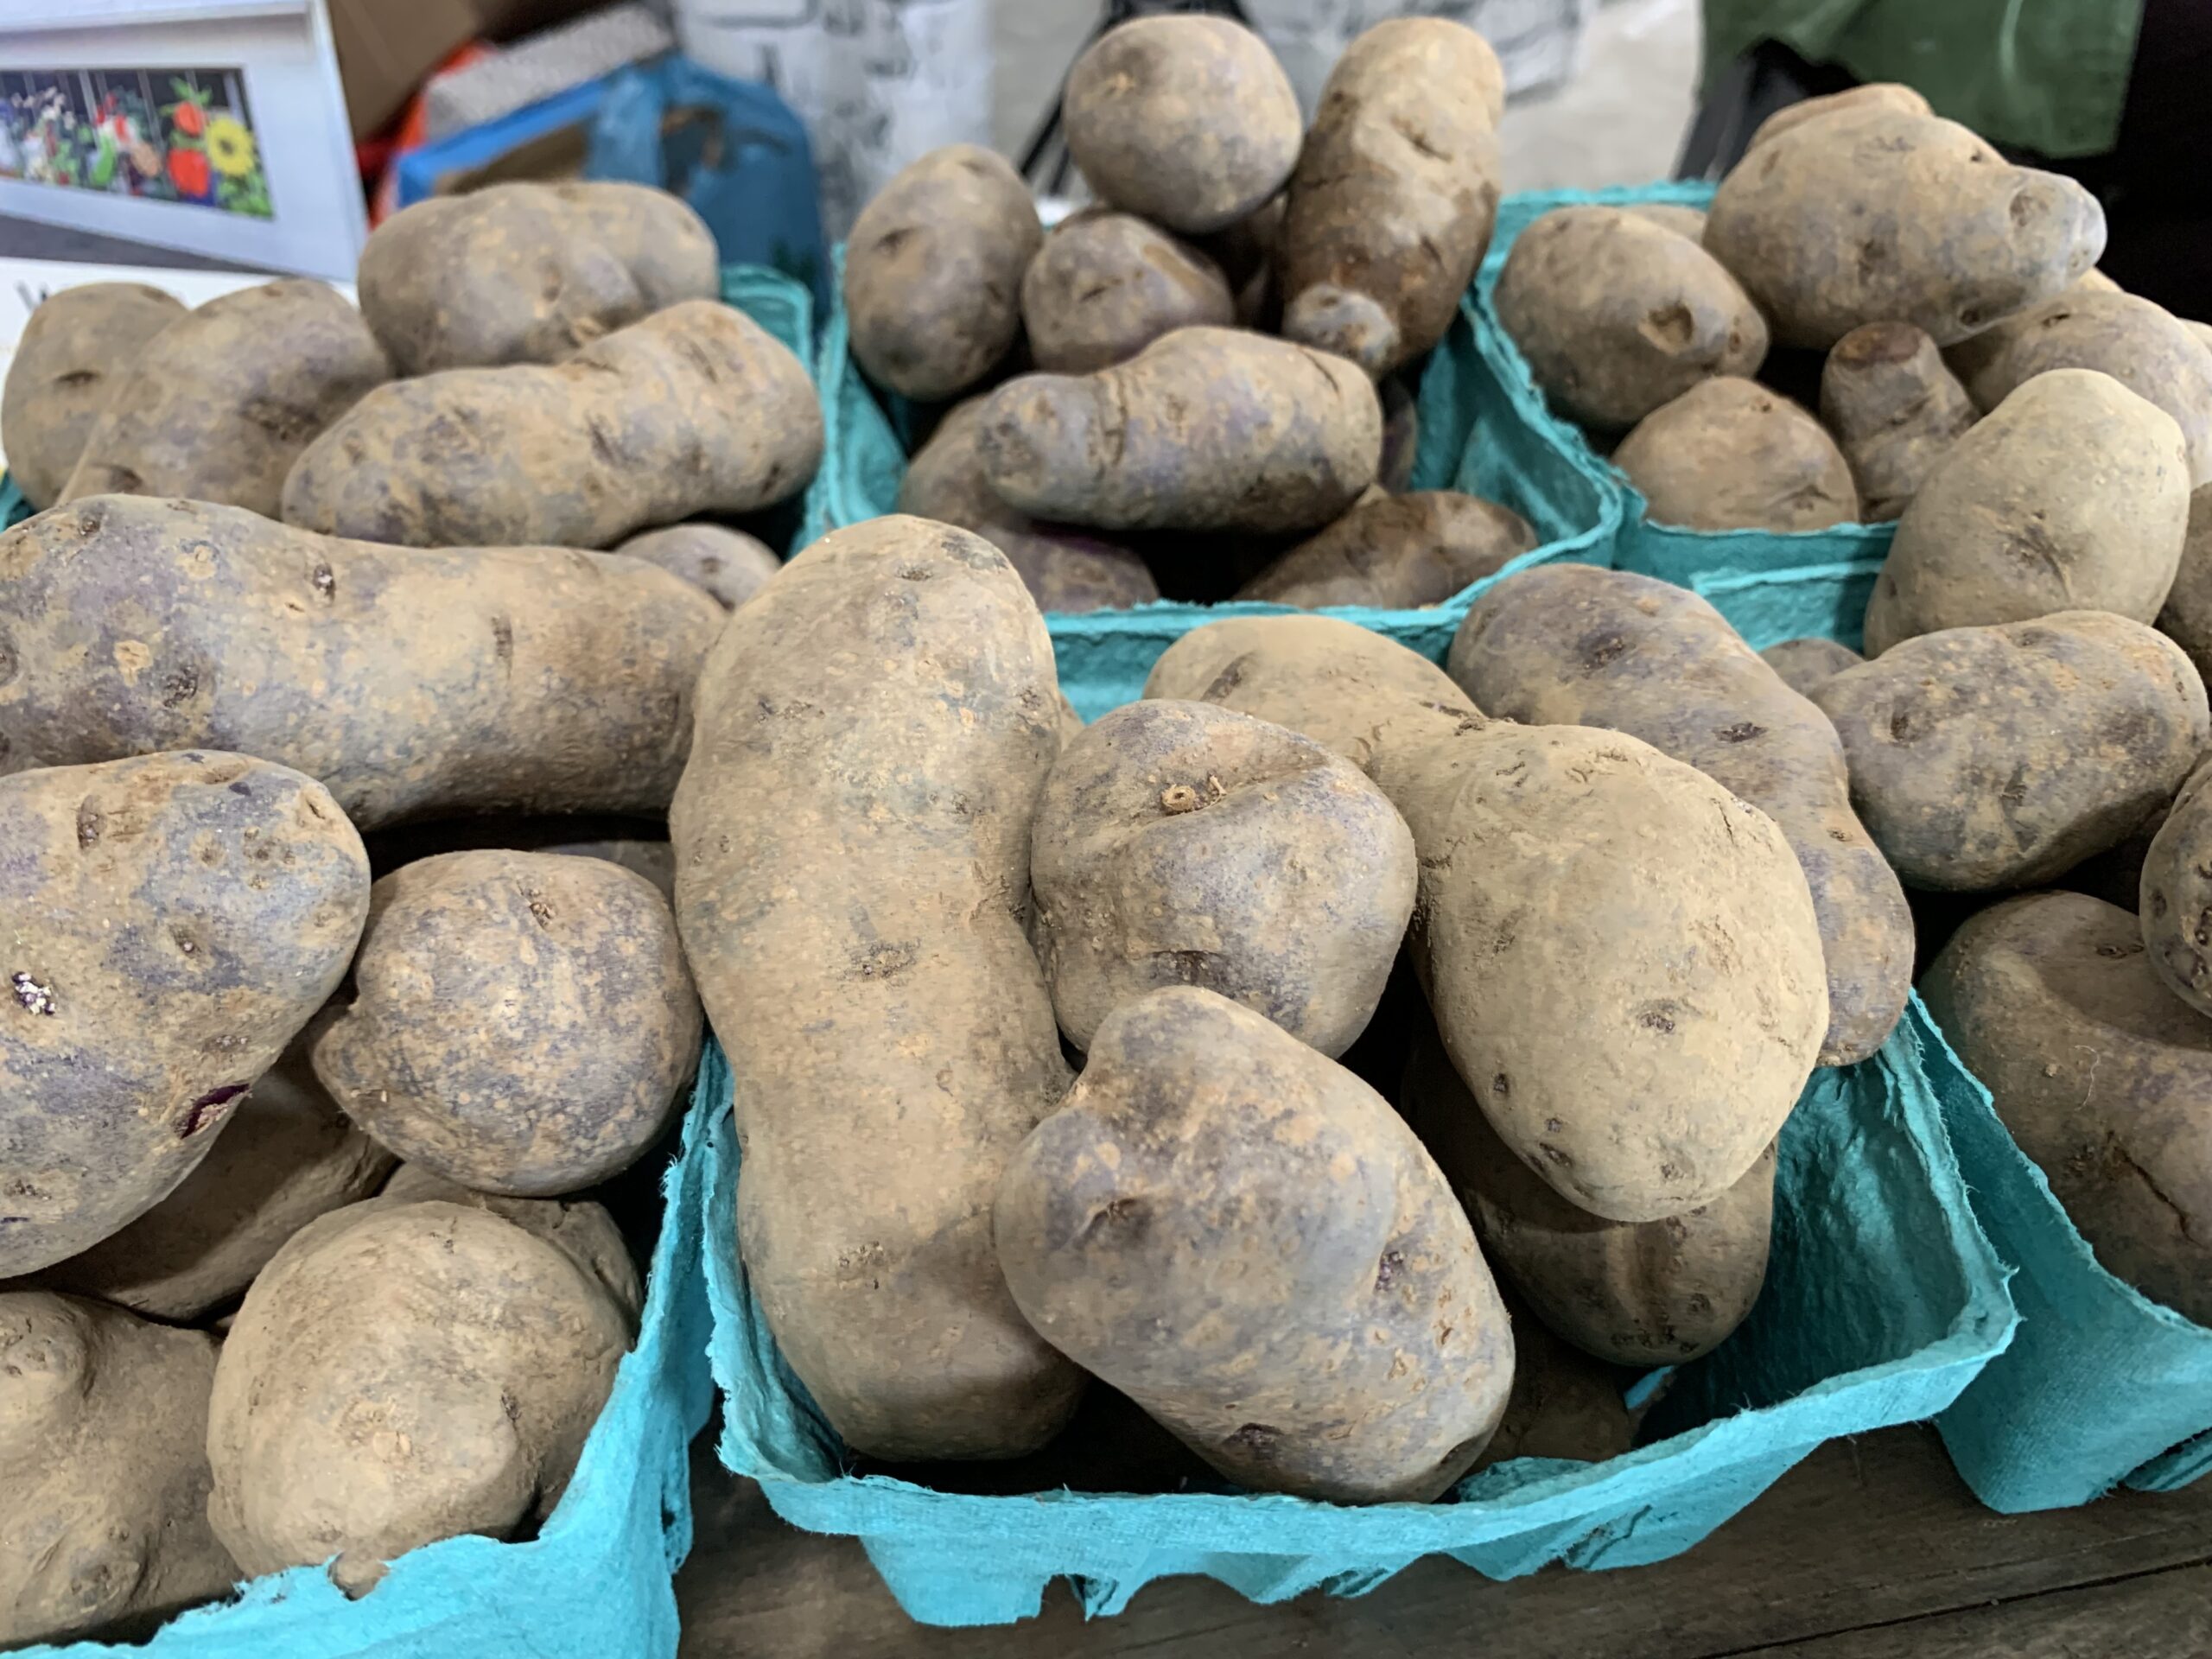 Marilee Foster’s potatoes at a recent East End Food Market. COURTESY STACYDERMONT.COM